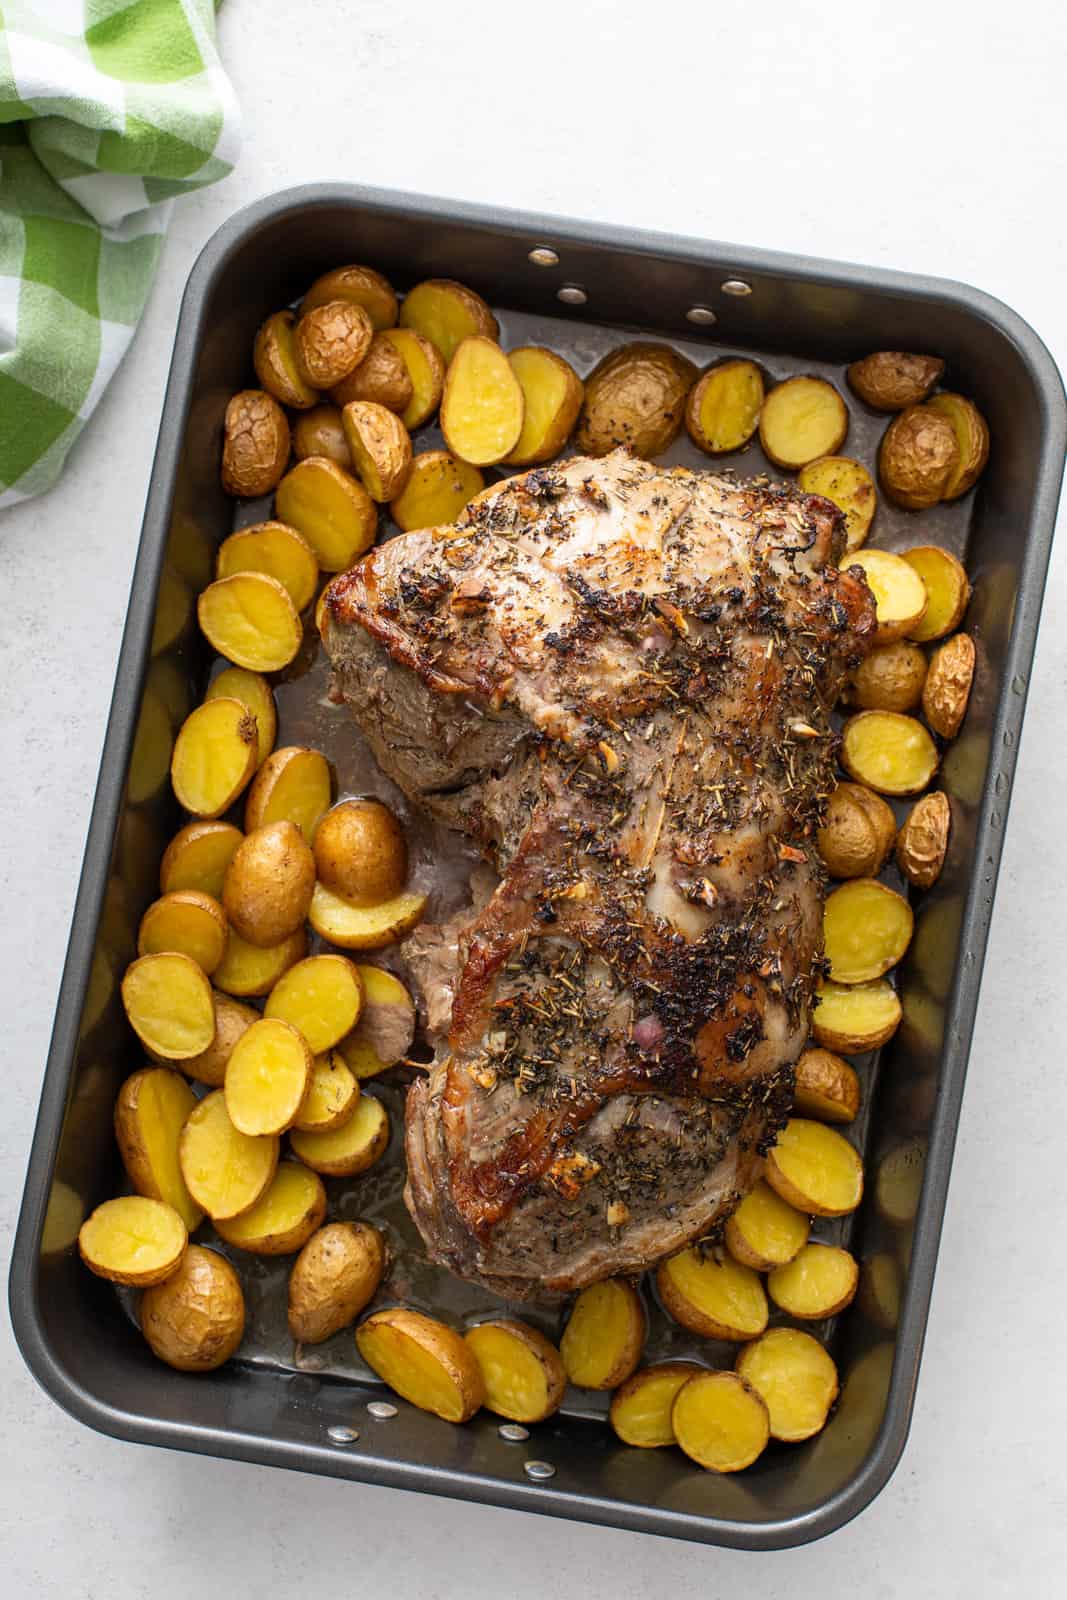 Cooked boneless leg of lamb in a roasting pan surrounded by roasted potatoes.